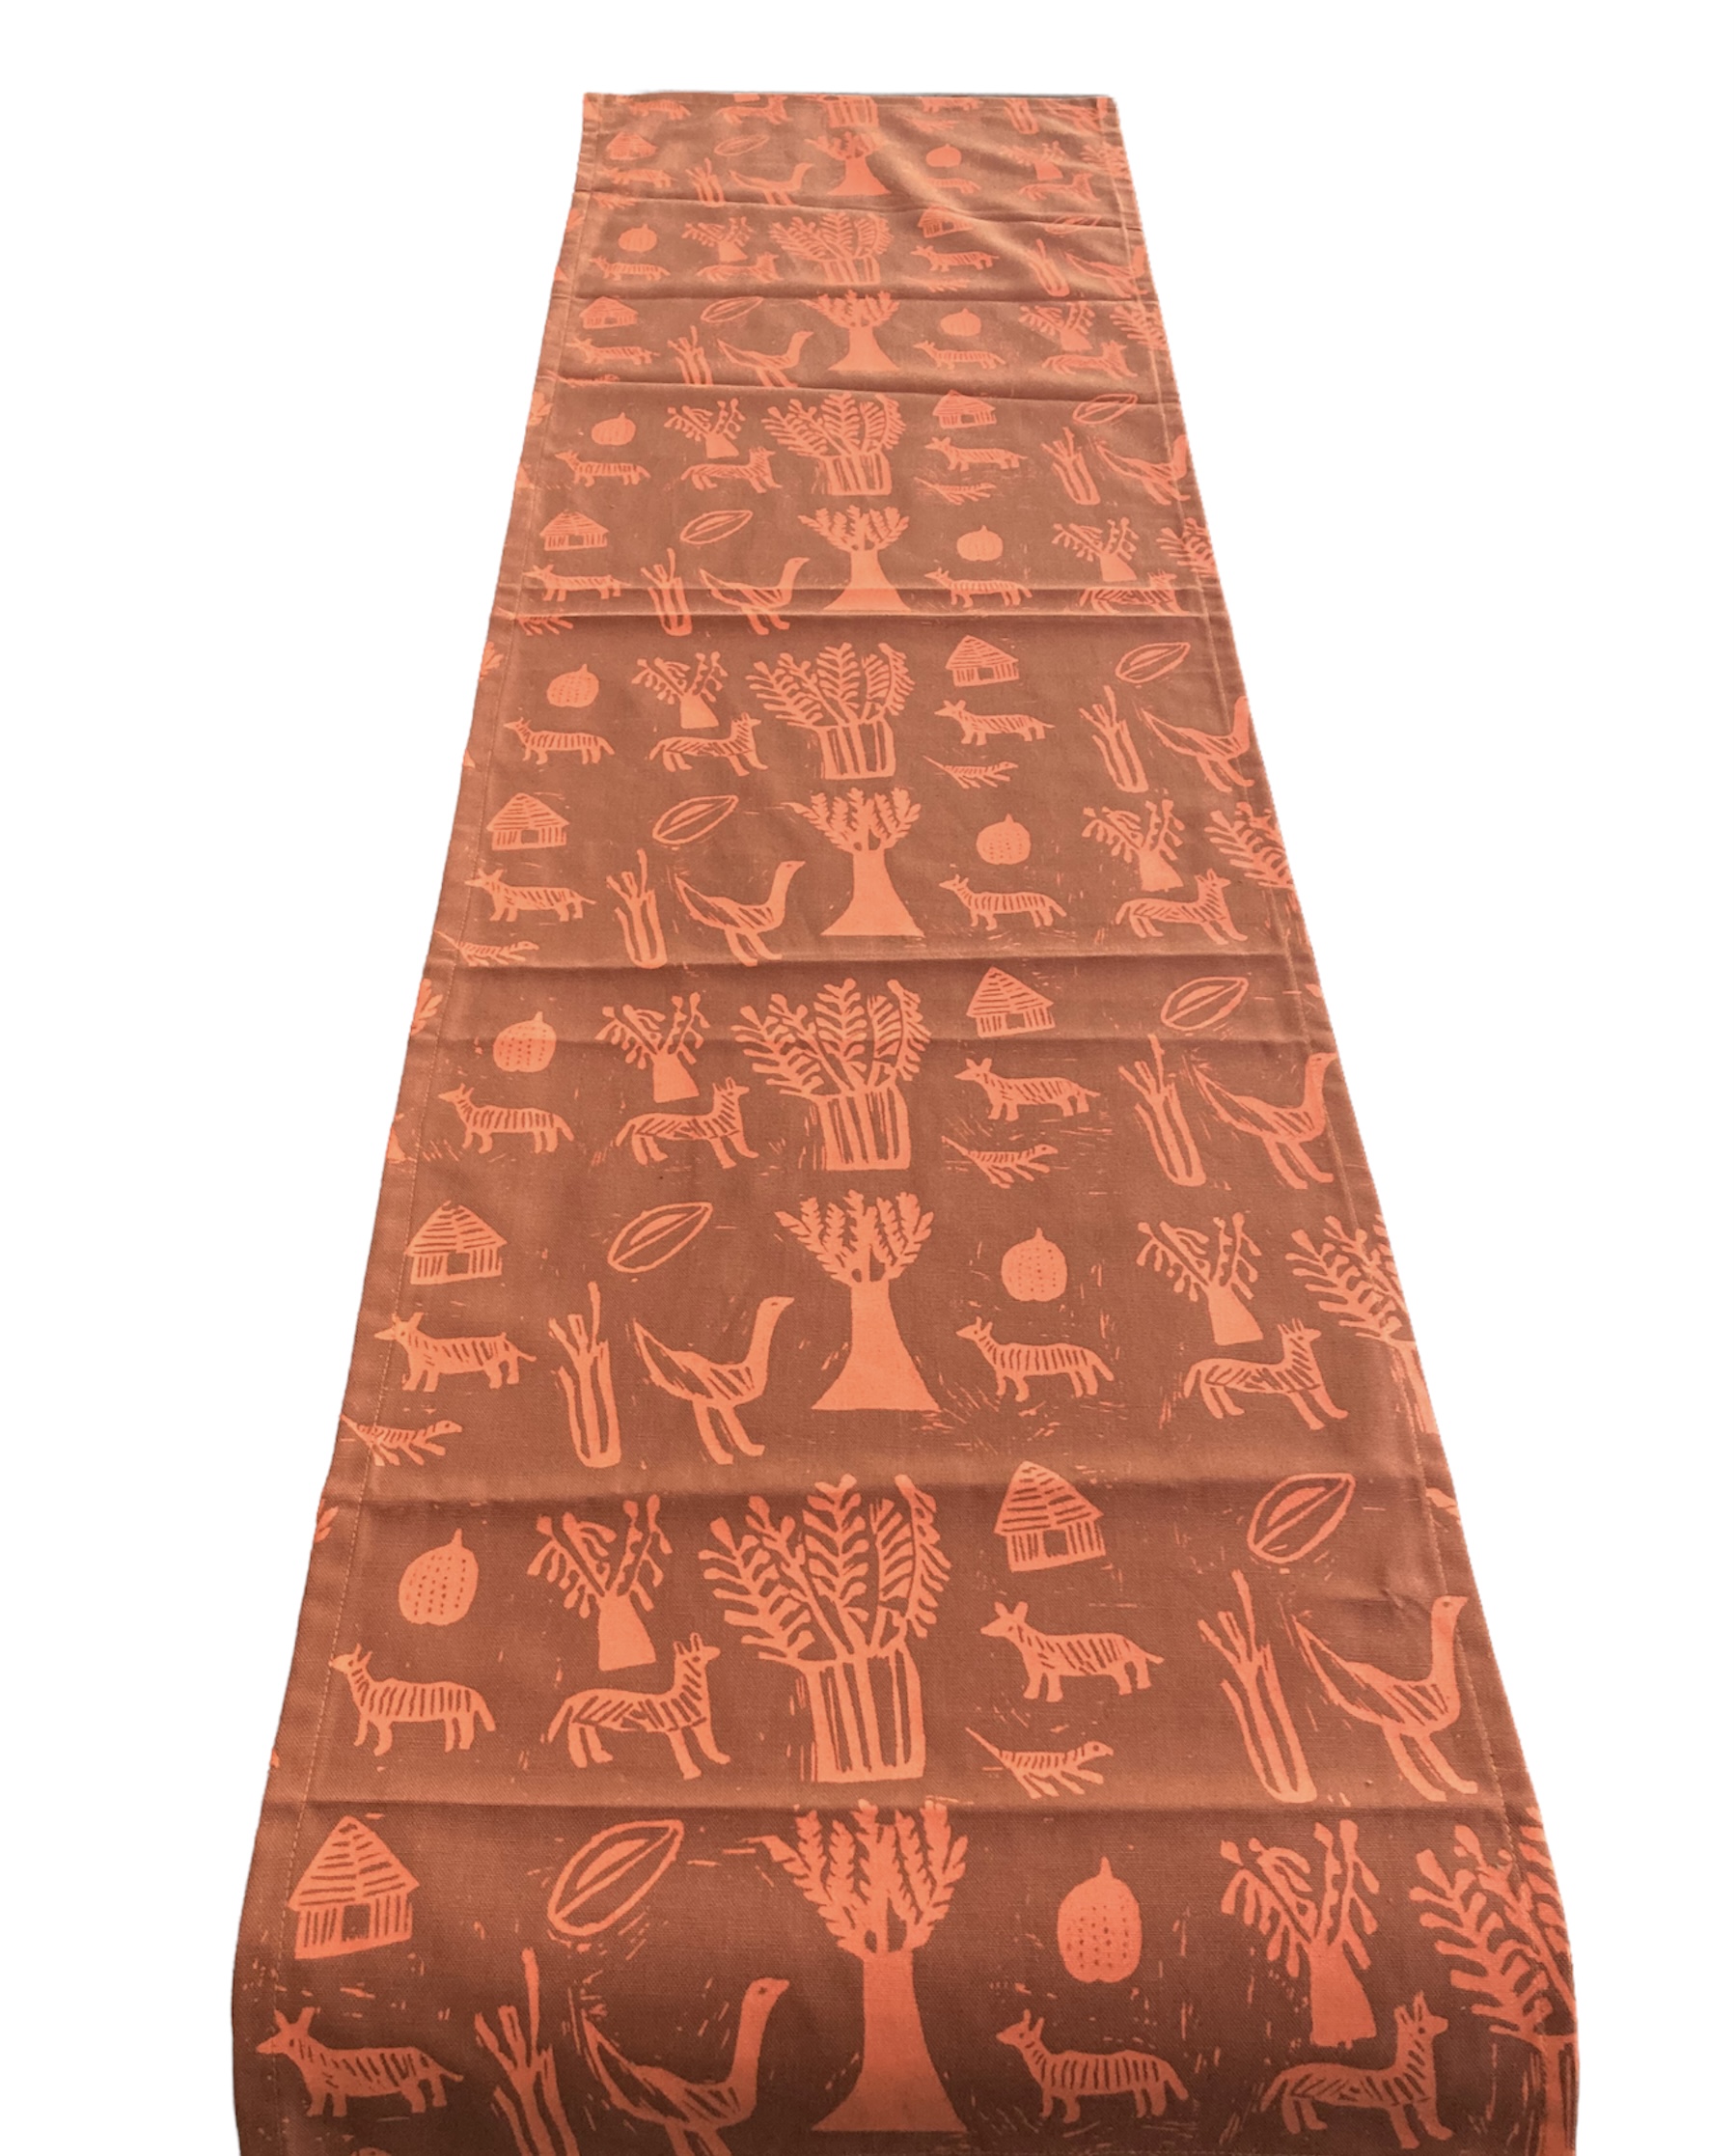 100% cotton Table Runner 96" x 16" from Namibia - Design 02l